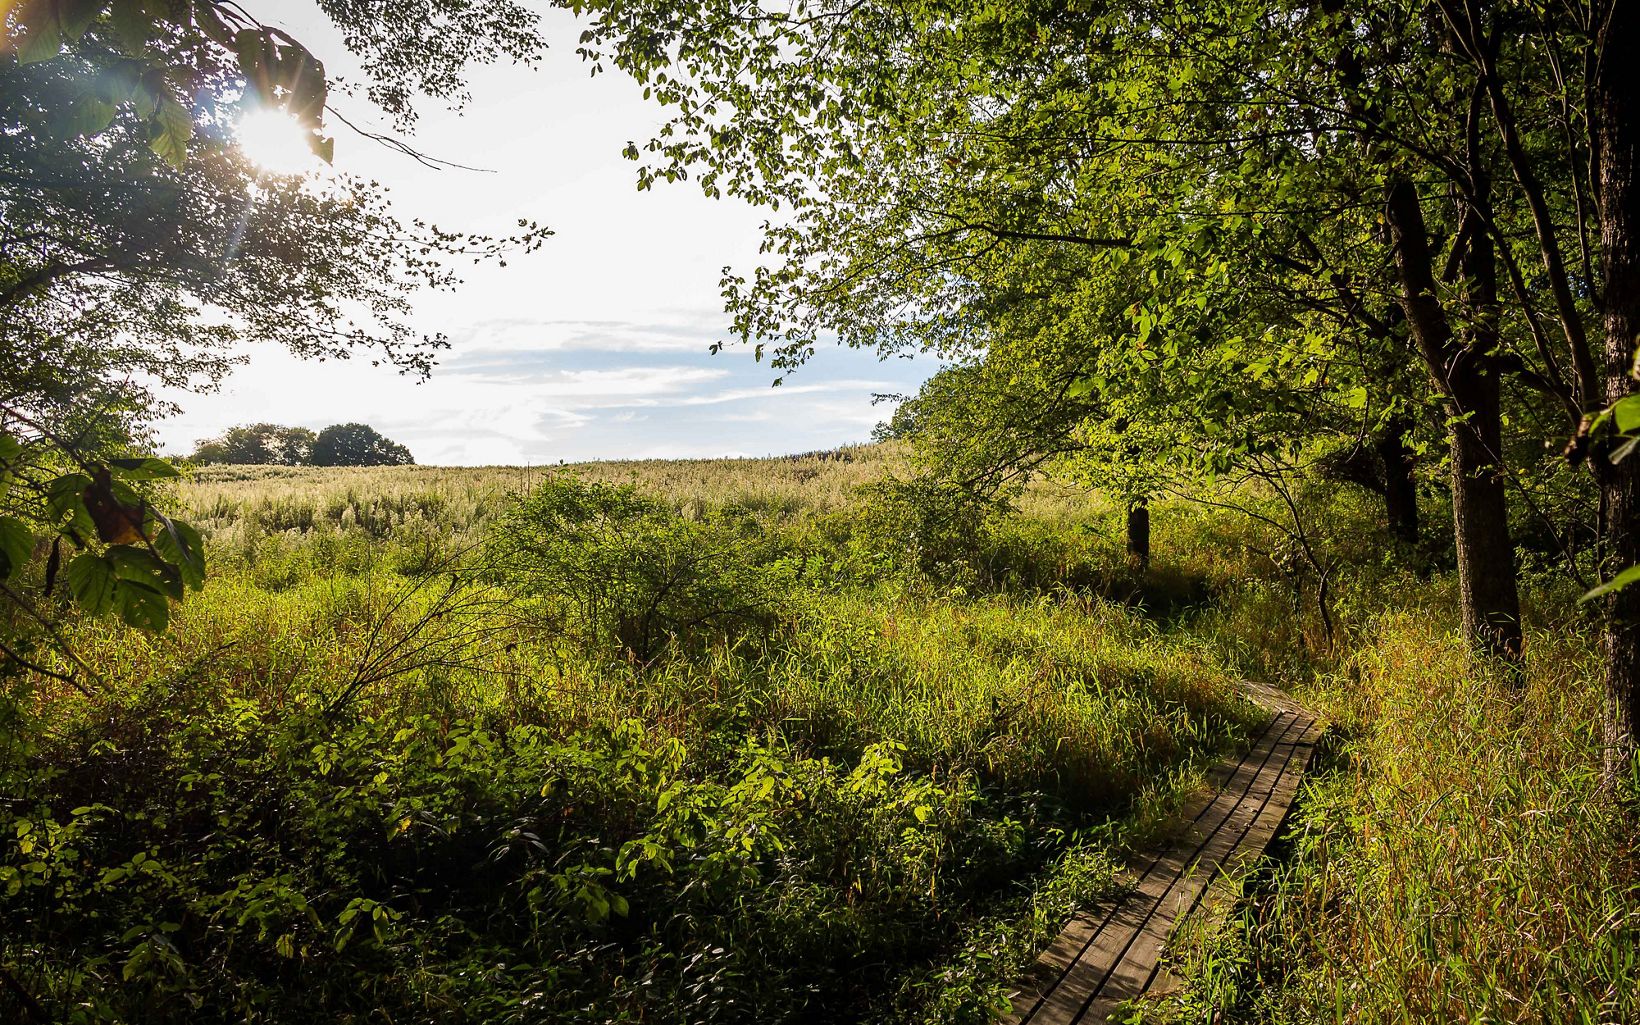 Brown's Lake Bog Preserve The boardwalk lush with foliage and sunshine on a summer day. © Emily Speelman